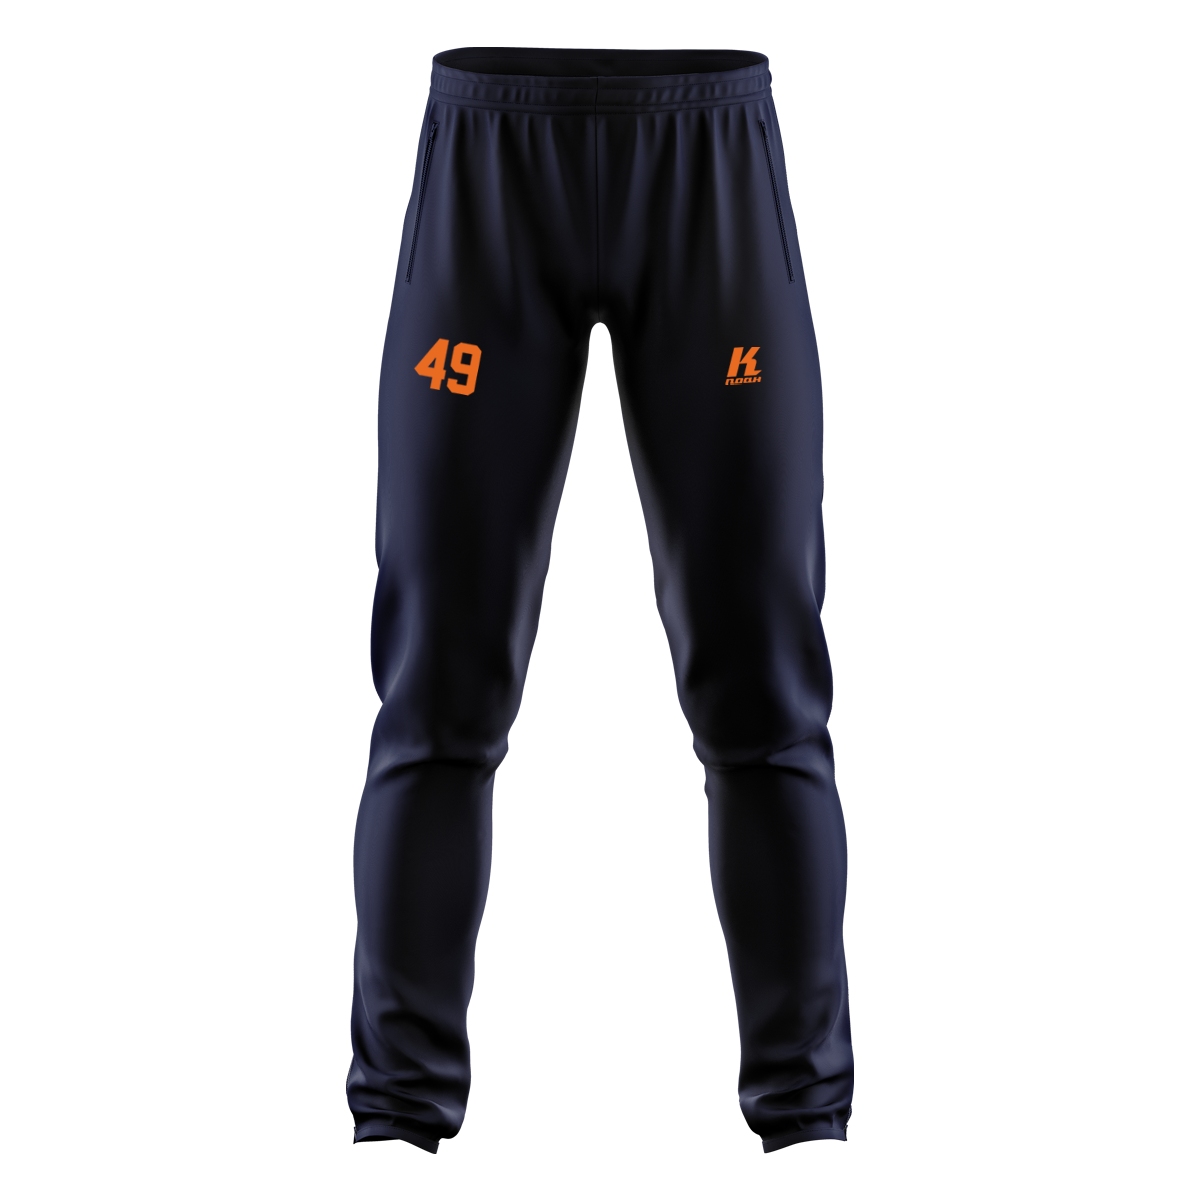 Tigers Leisure Pant with Playernumber/Initials